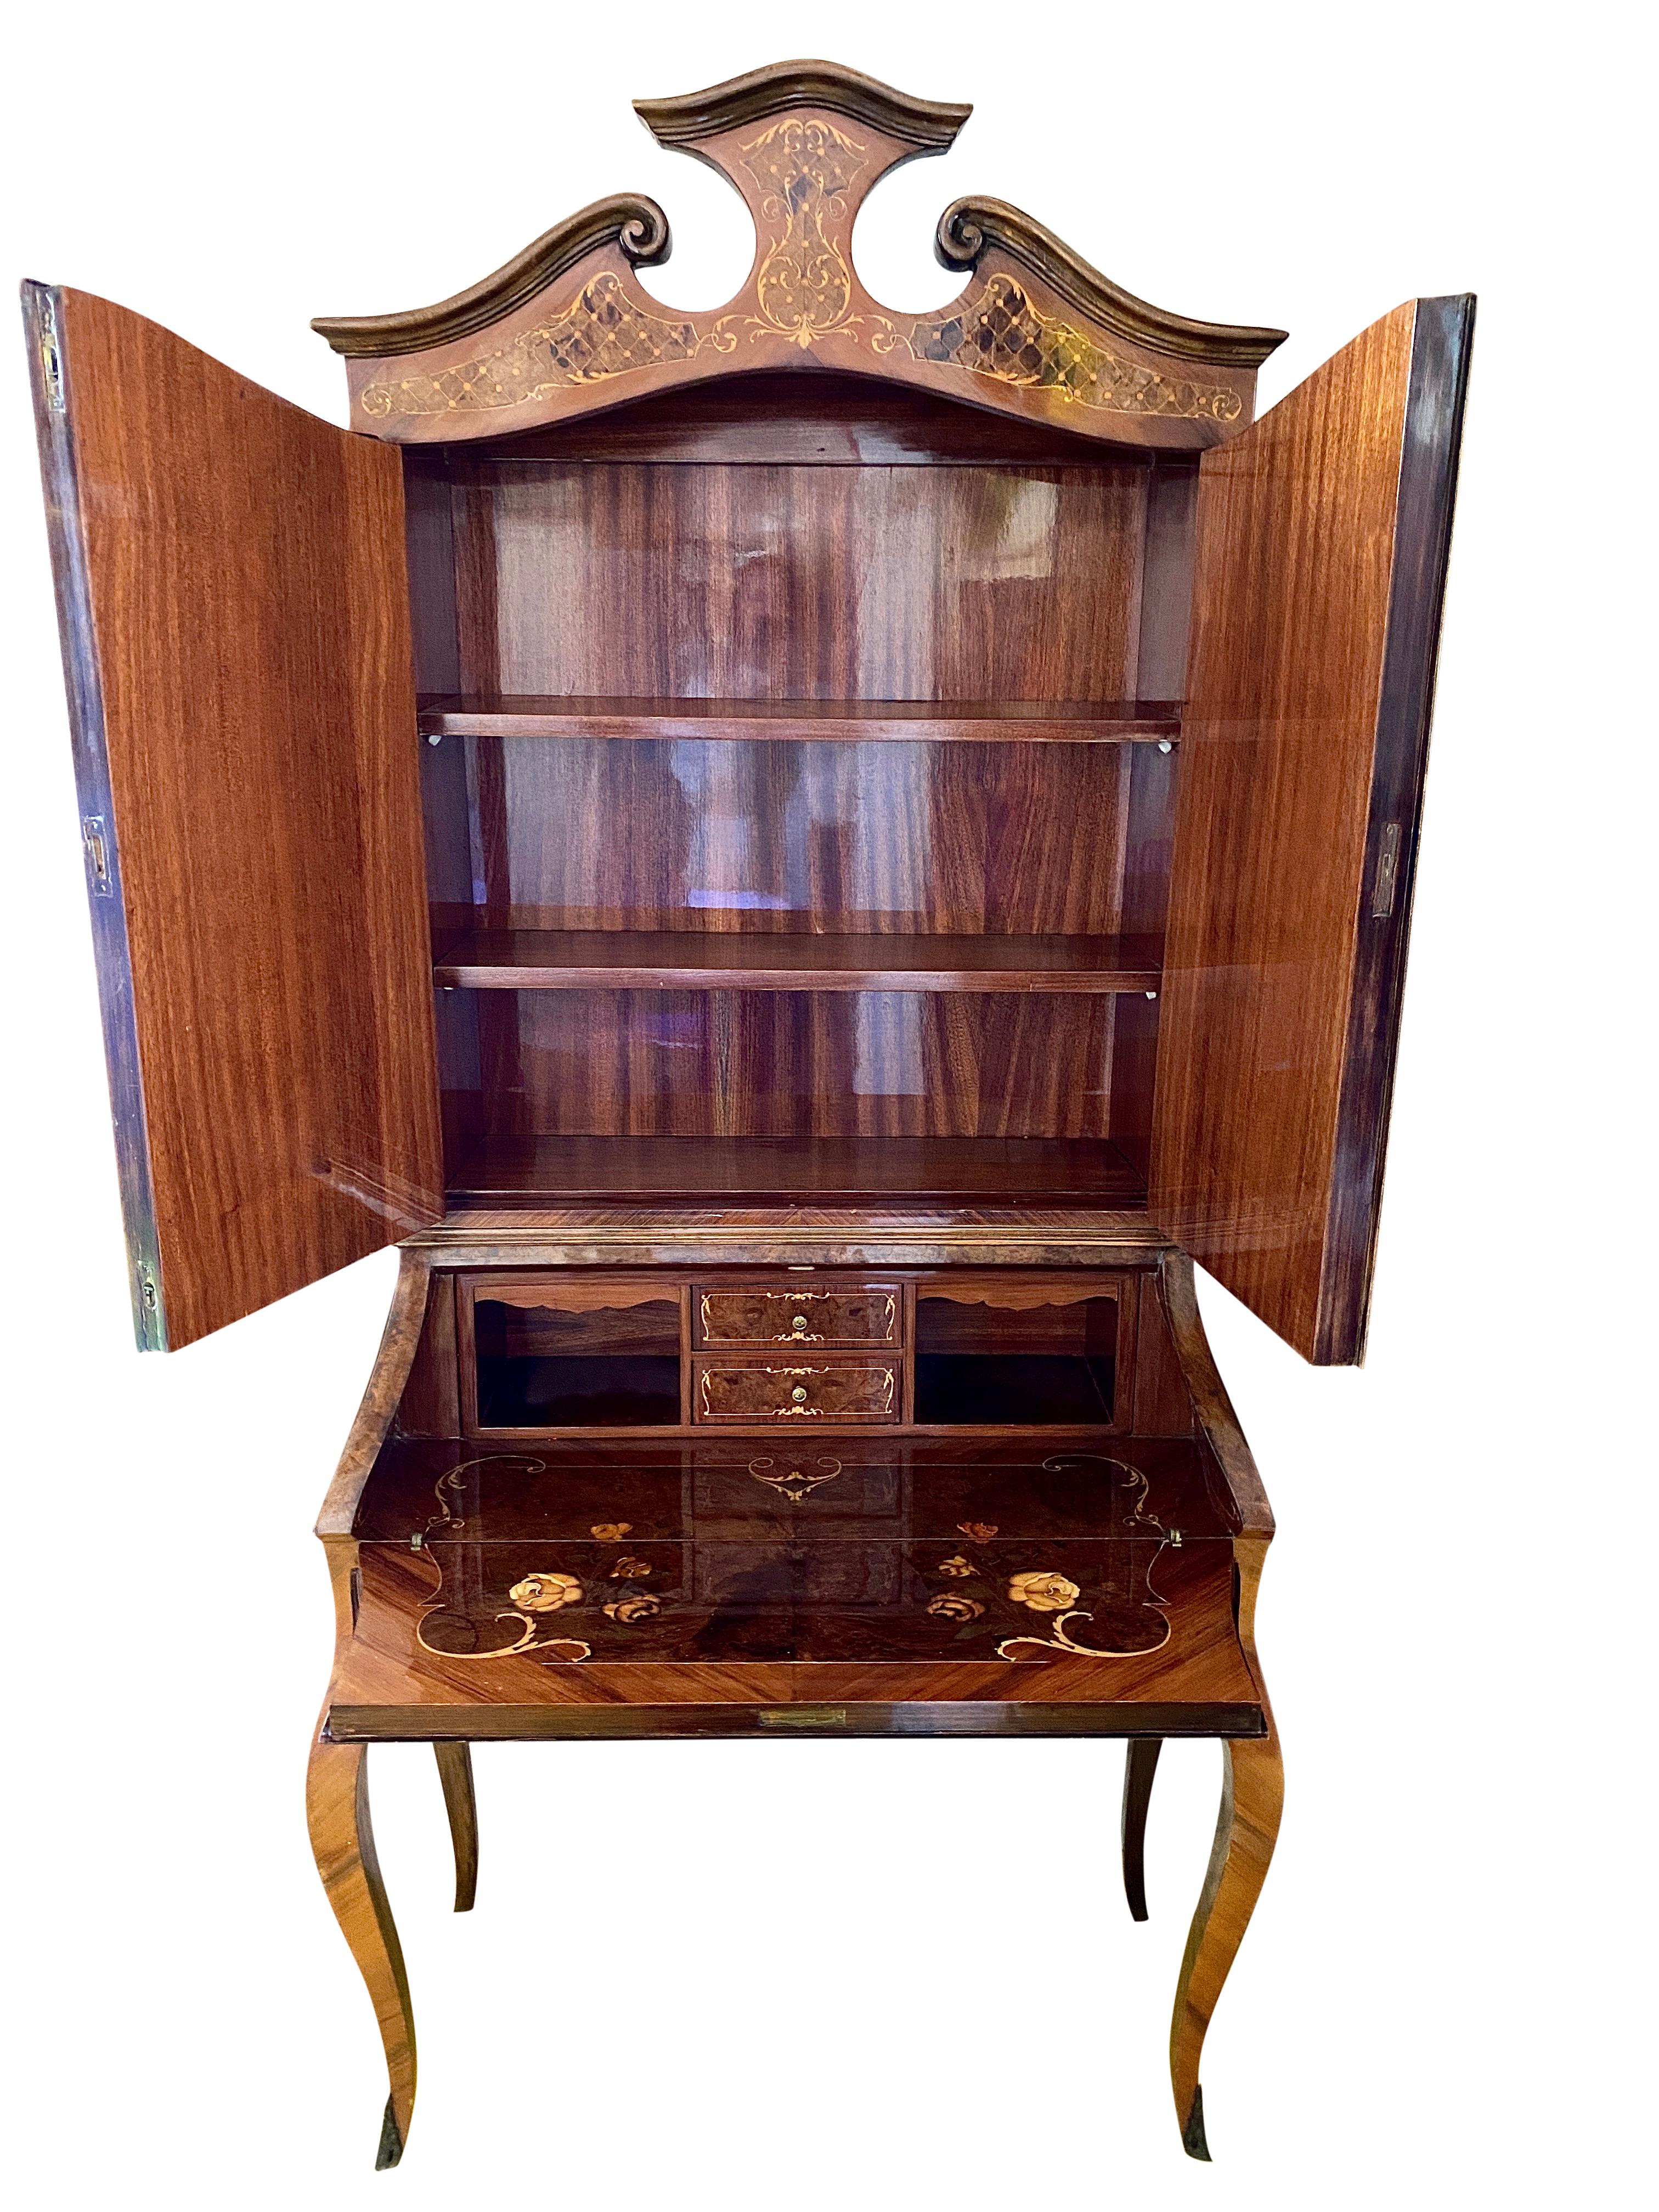 Art Nouveau Italian c. 1910 Satinwood Secretaire with Marquetry Inlay For Sale